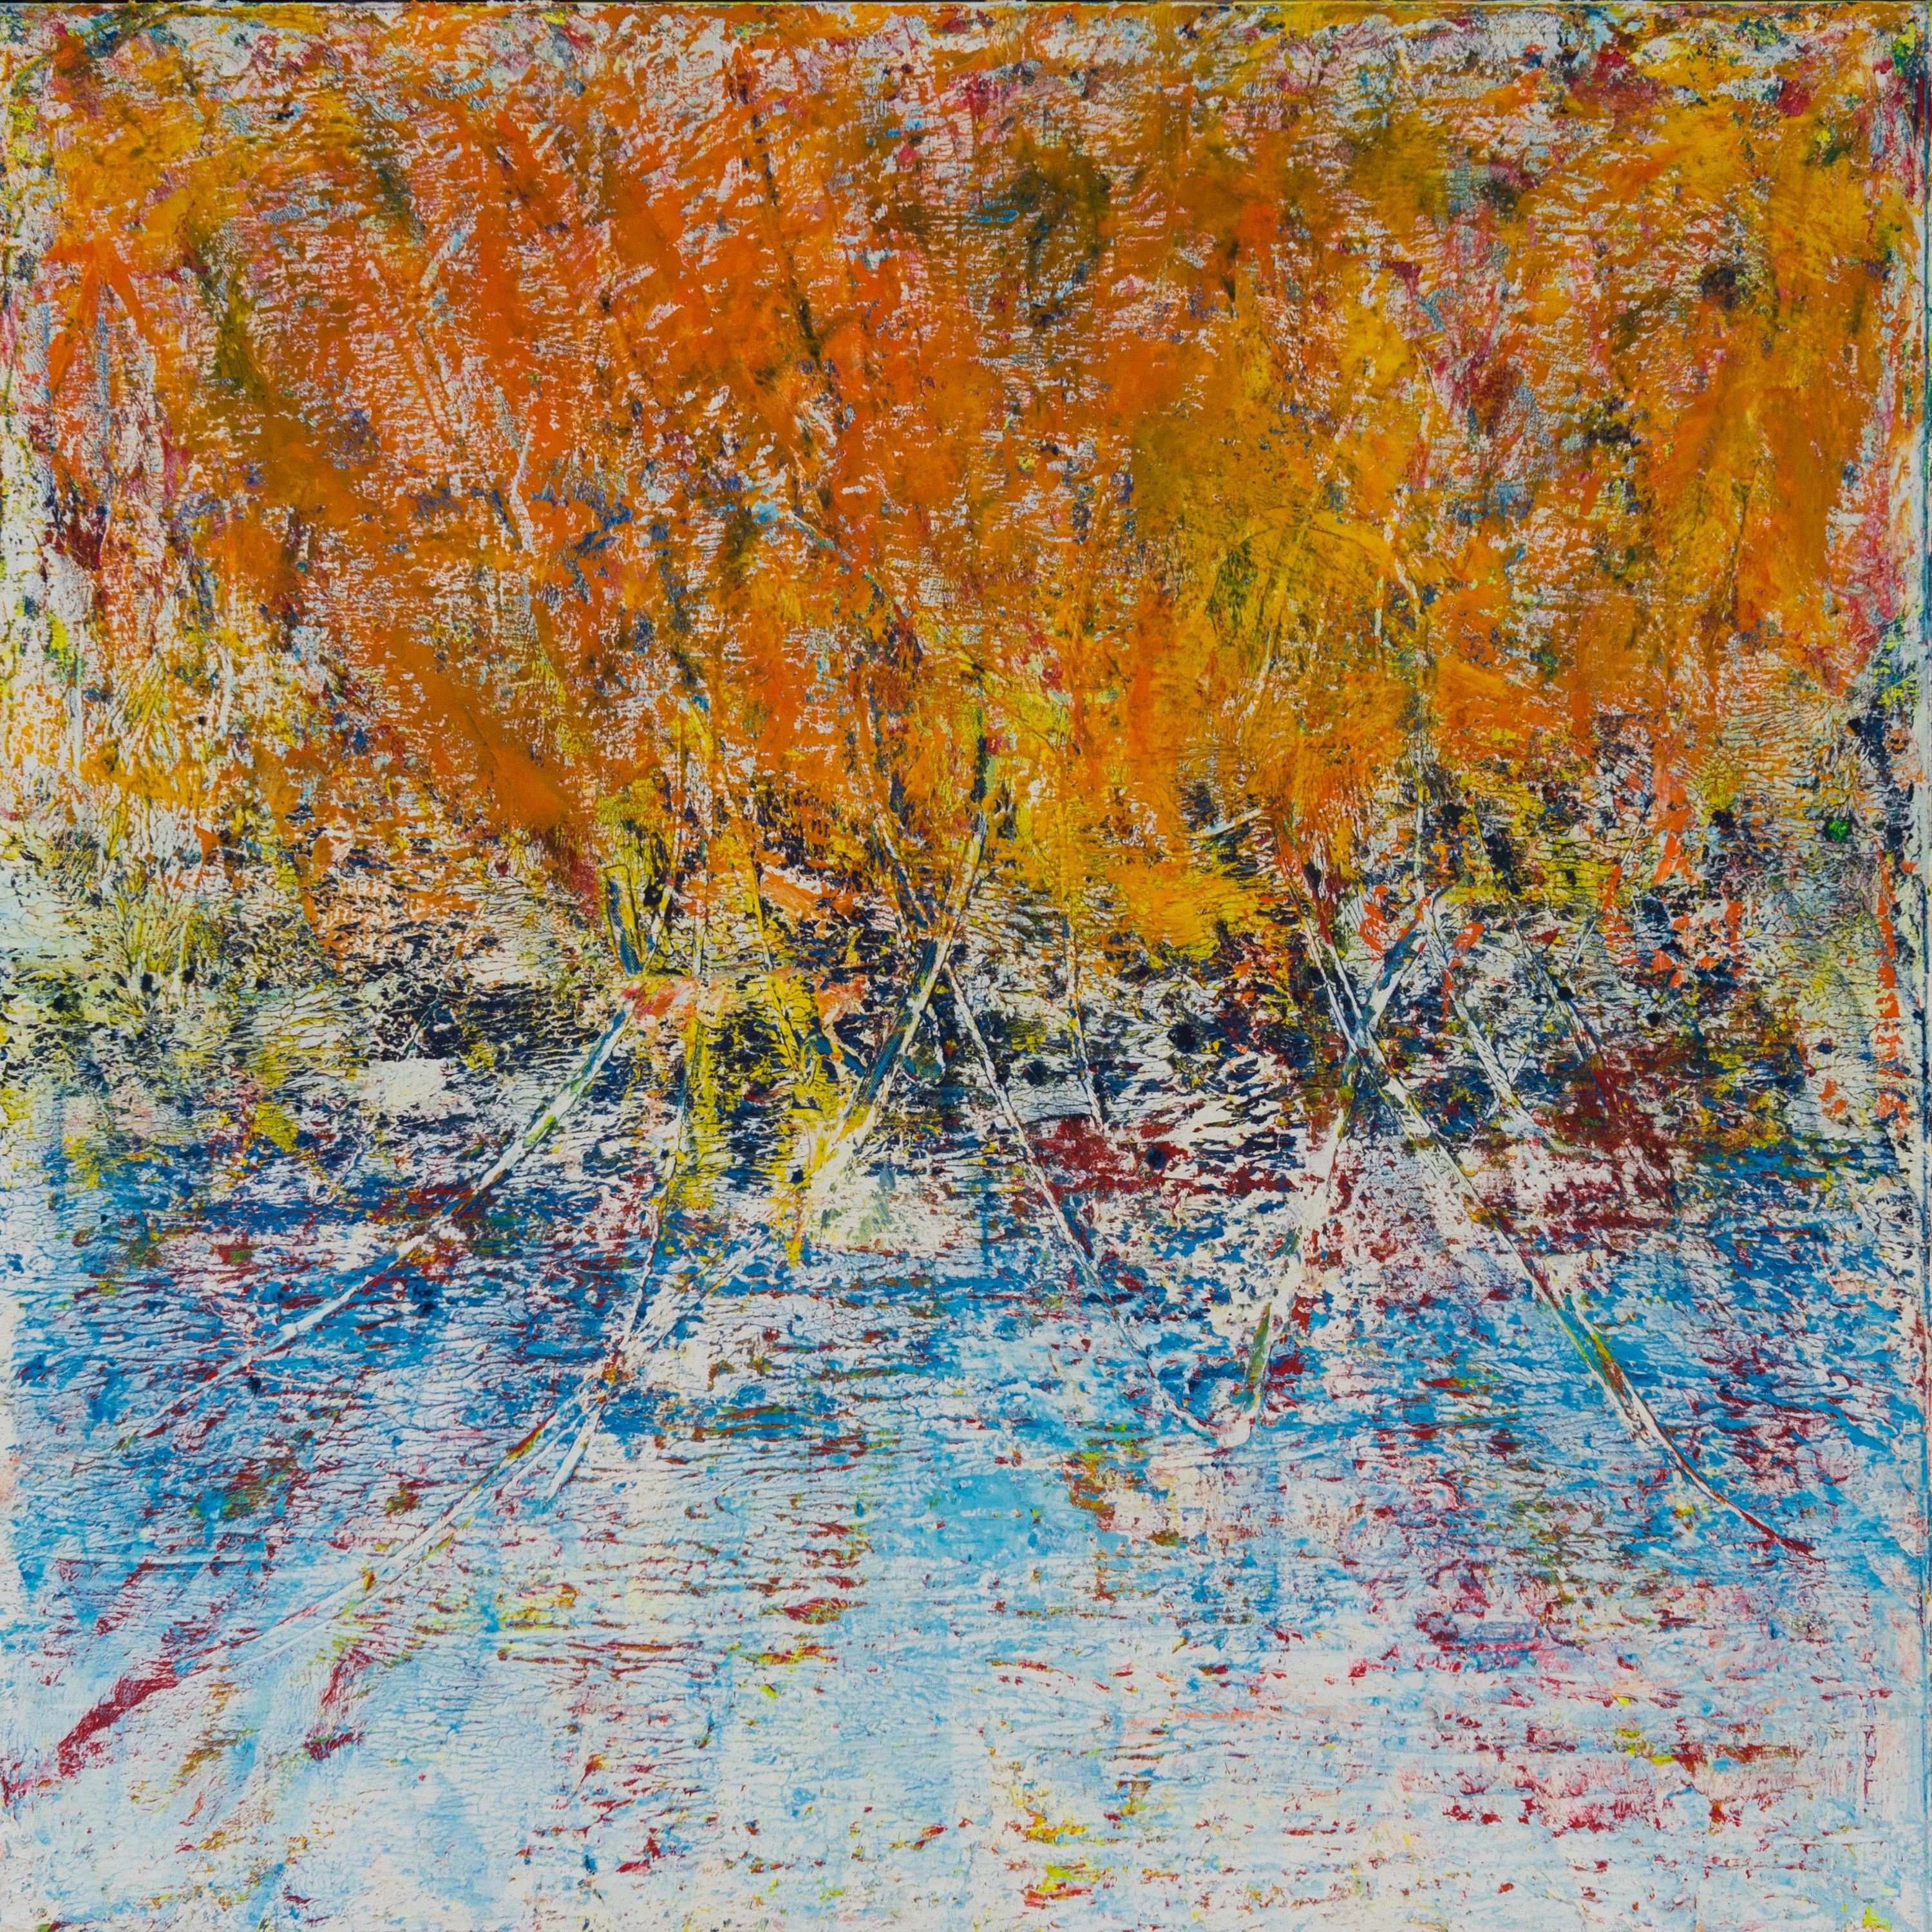 "Orange Sky" Abstract Painting 39" x 39" inch by Ahmed Farid